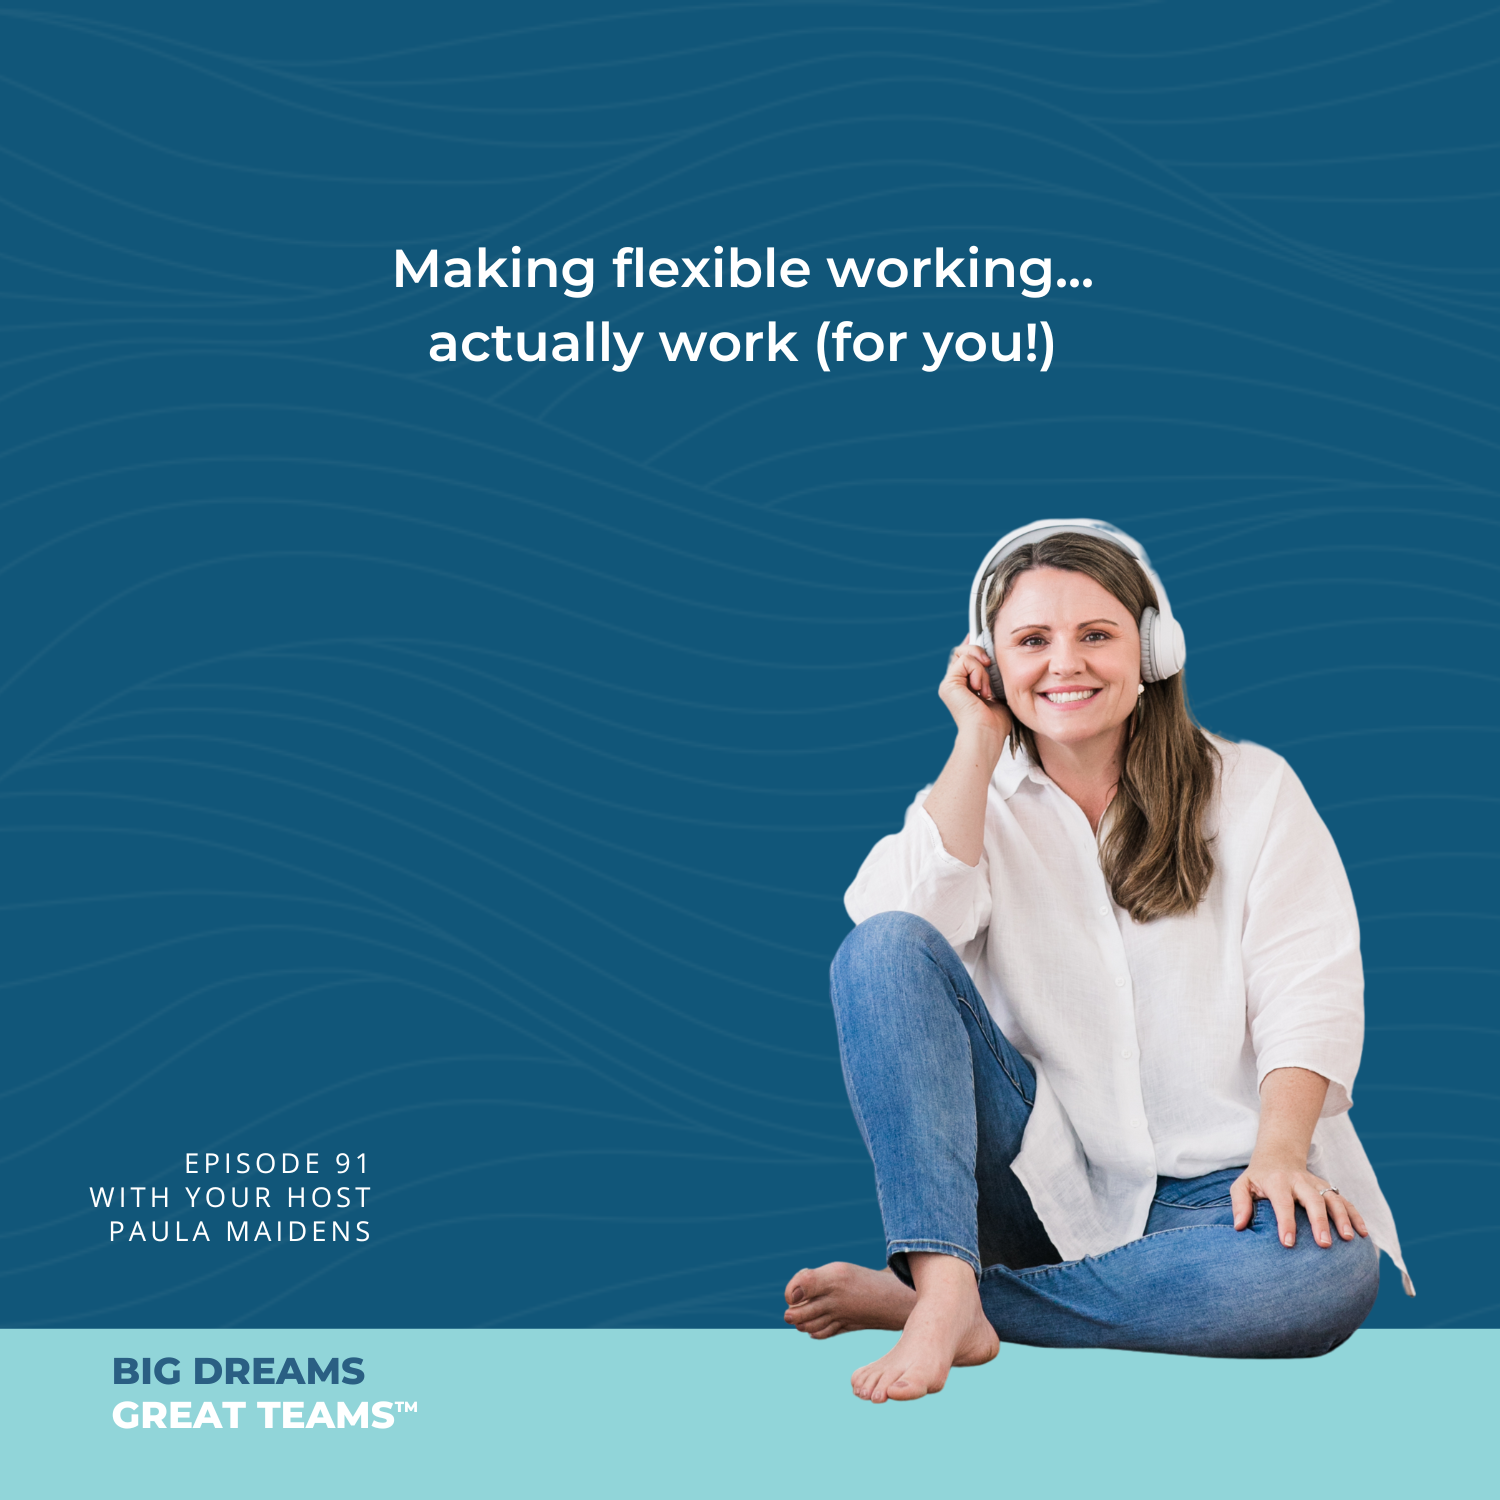 Episode #91 Making flexible working... actually work (for you!)